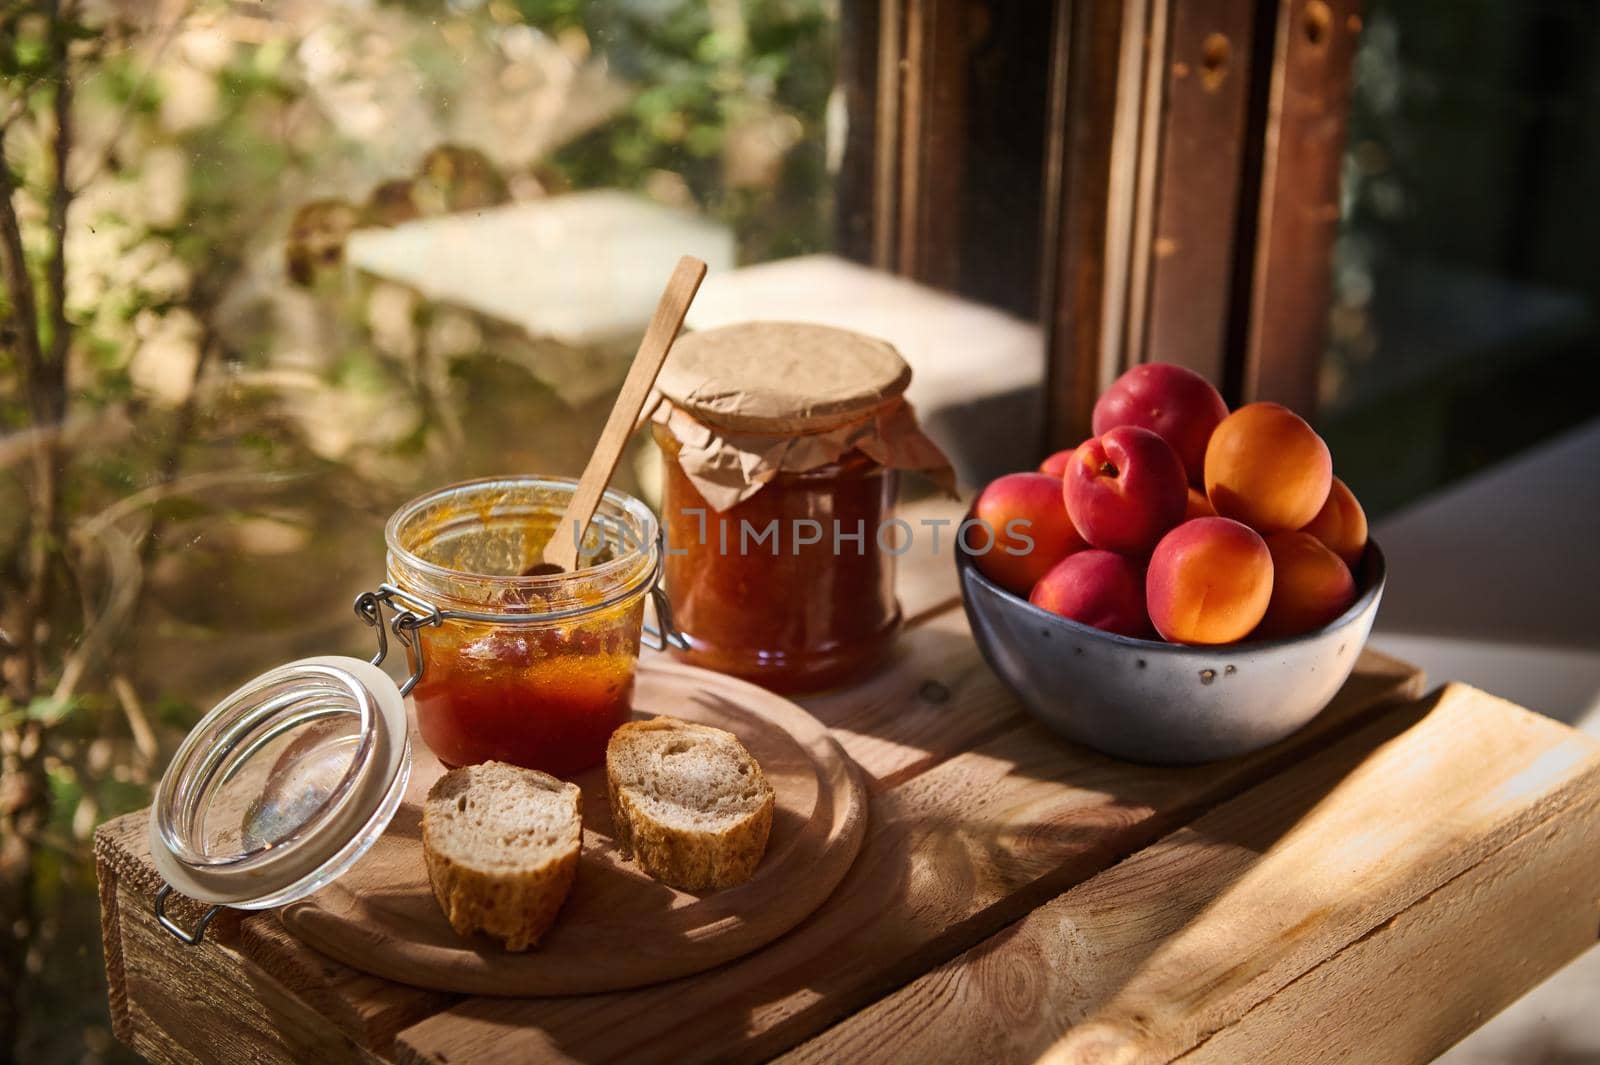 Still life. Canned products. Homemade jam and marmalade in a glass jar, slices of a freshly baked whole grain bread and sweet ripe organic apricots against a wooden window overlooking a rural garden